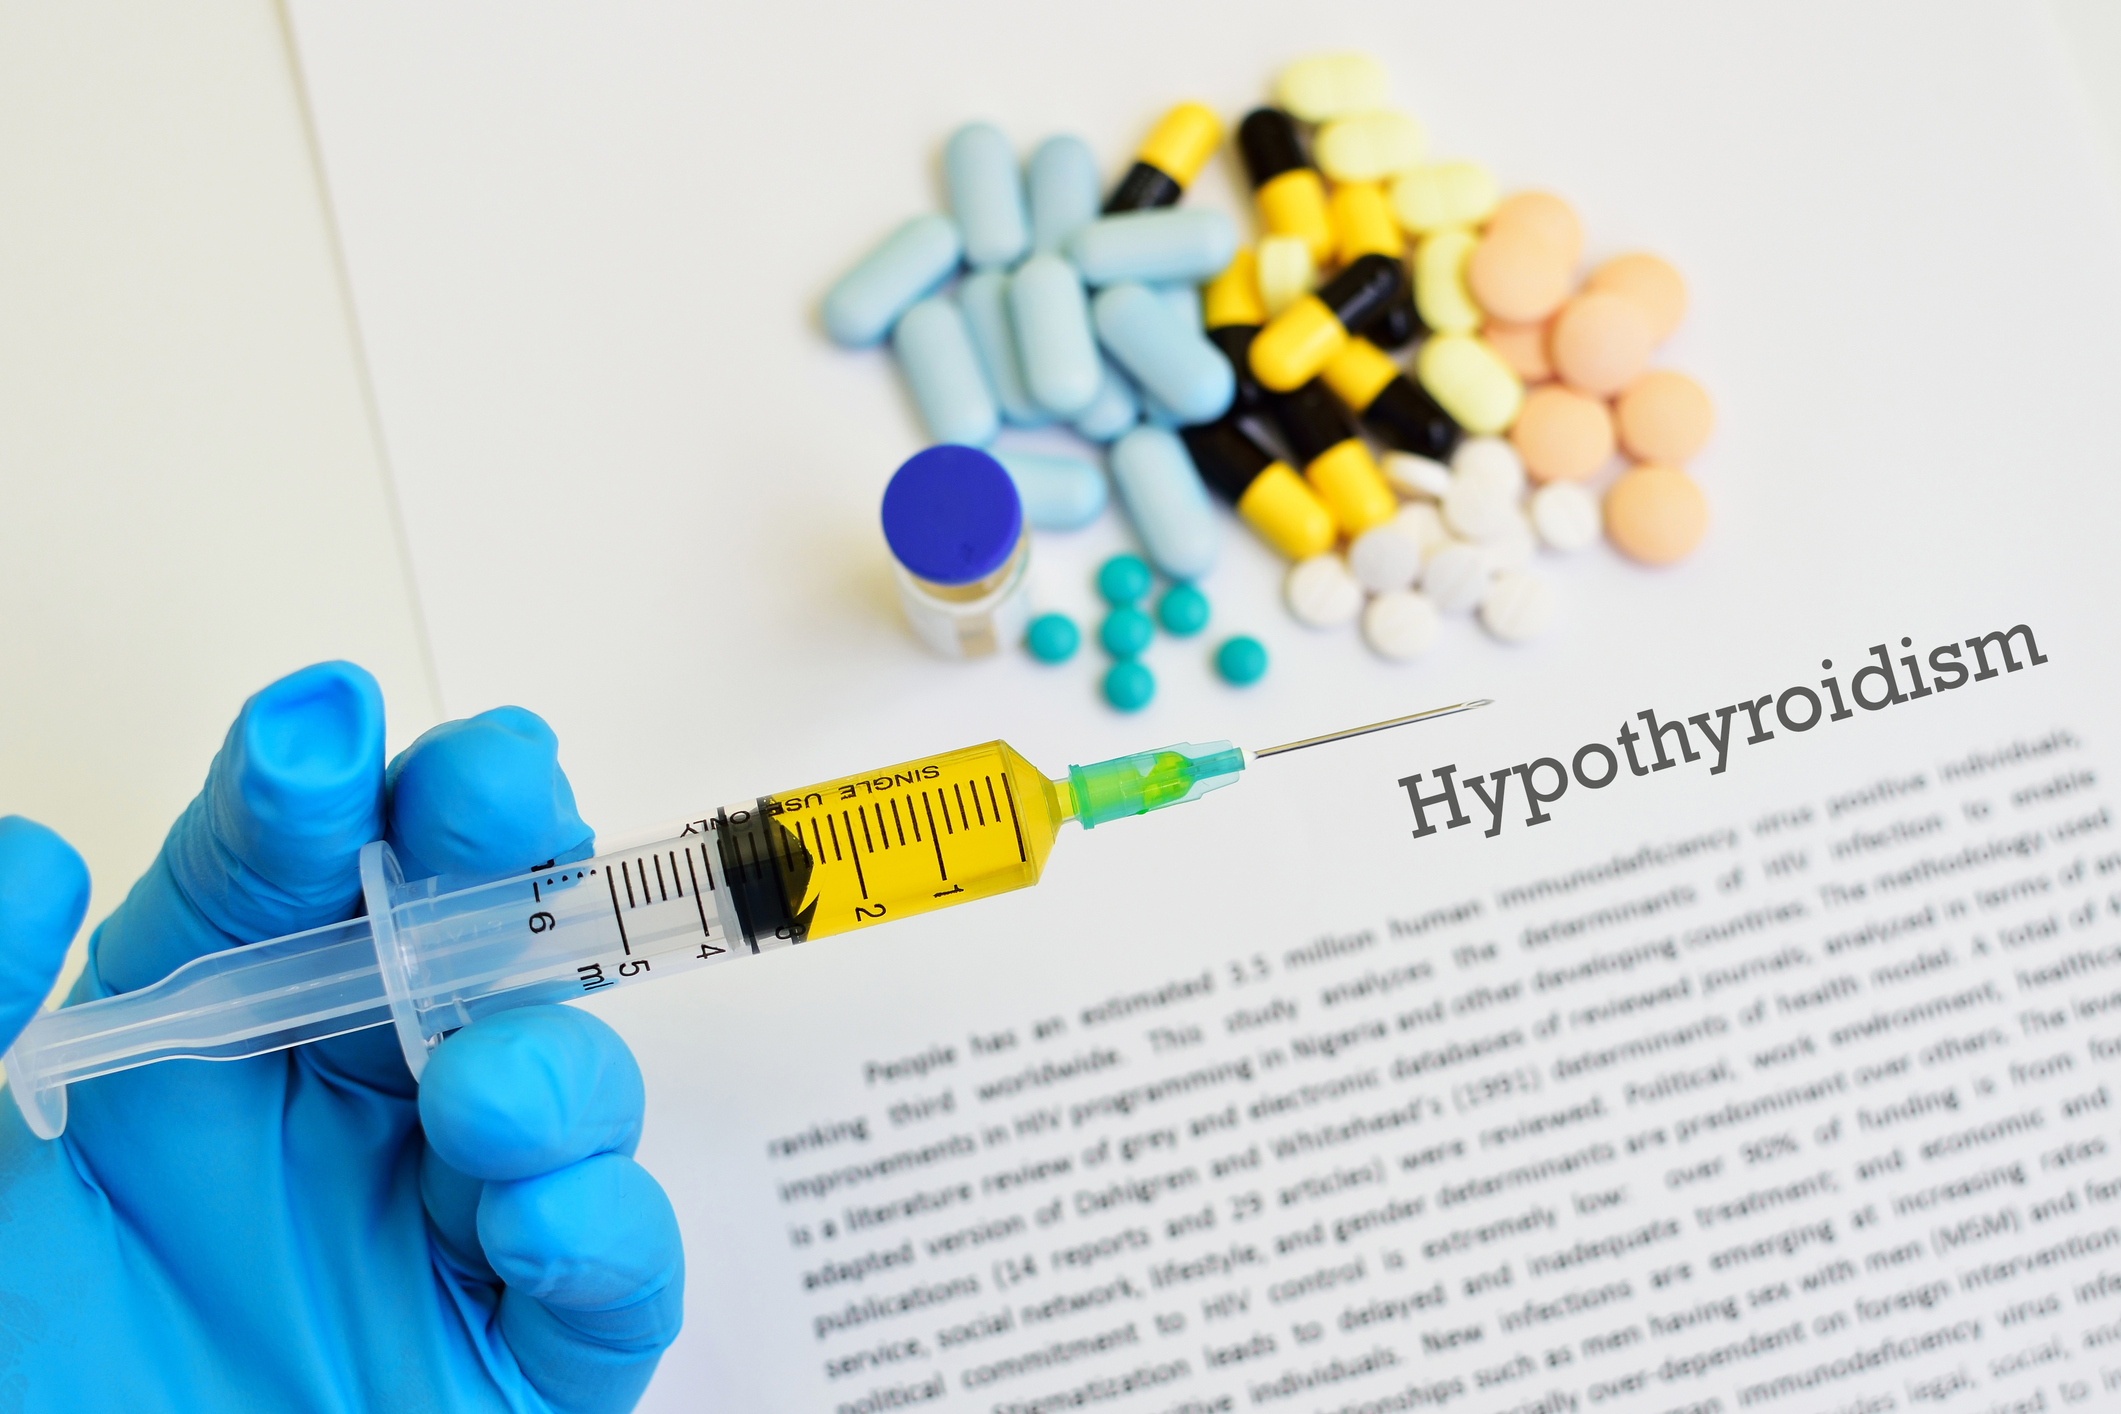 Does hypothyroidism increase the...